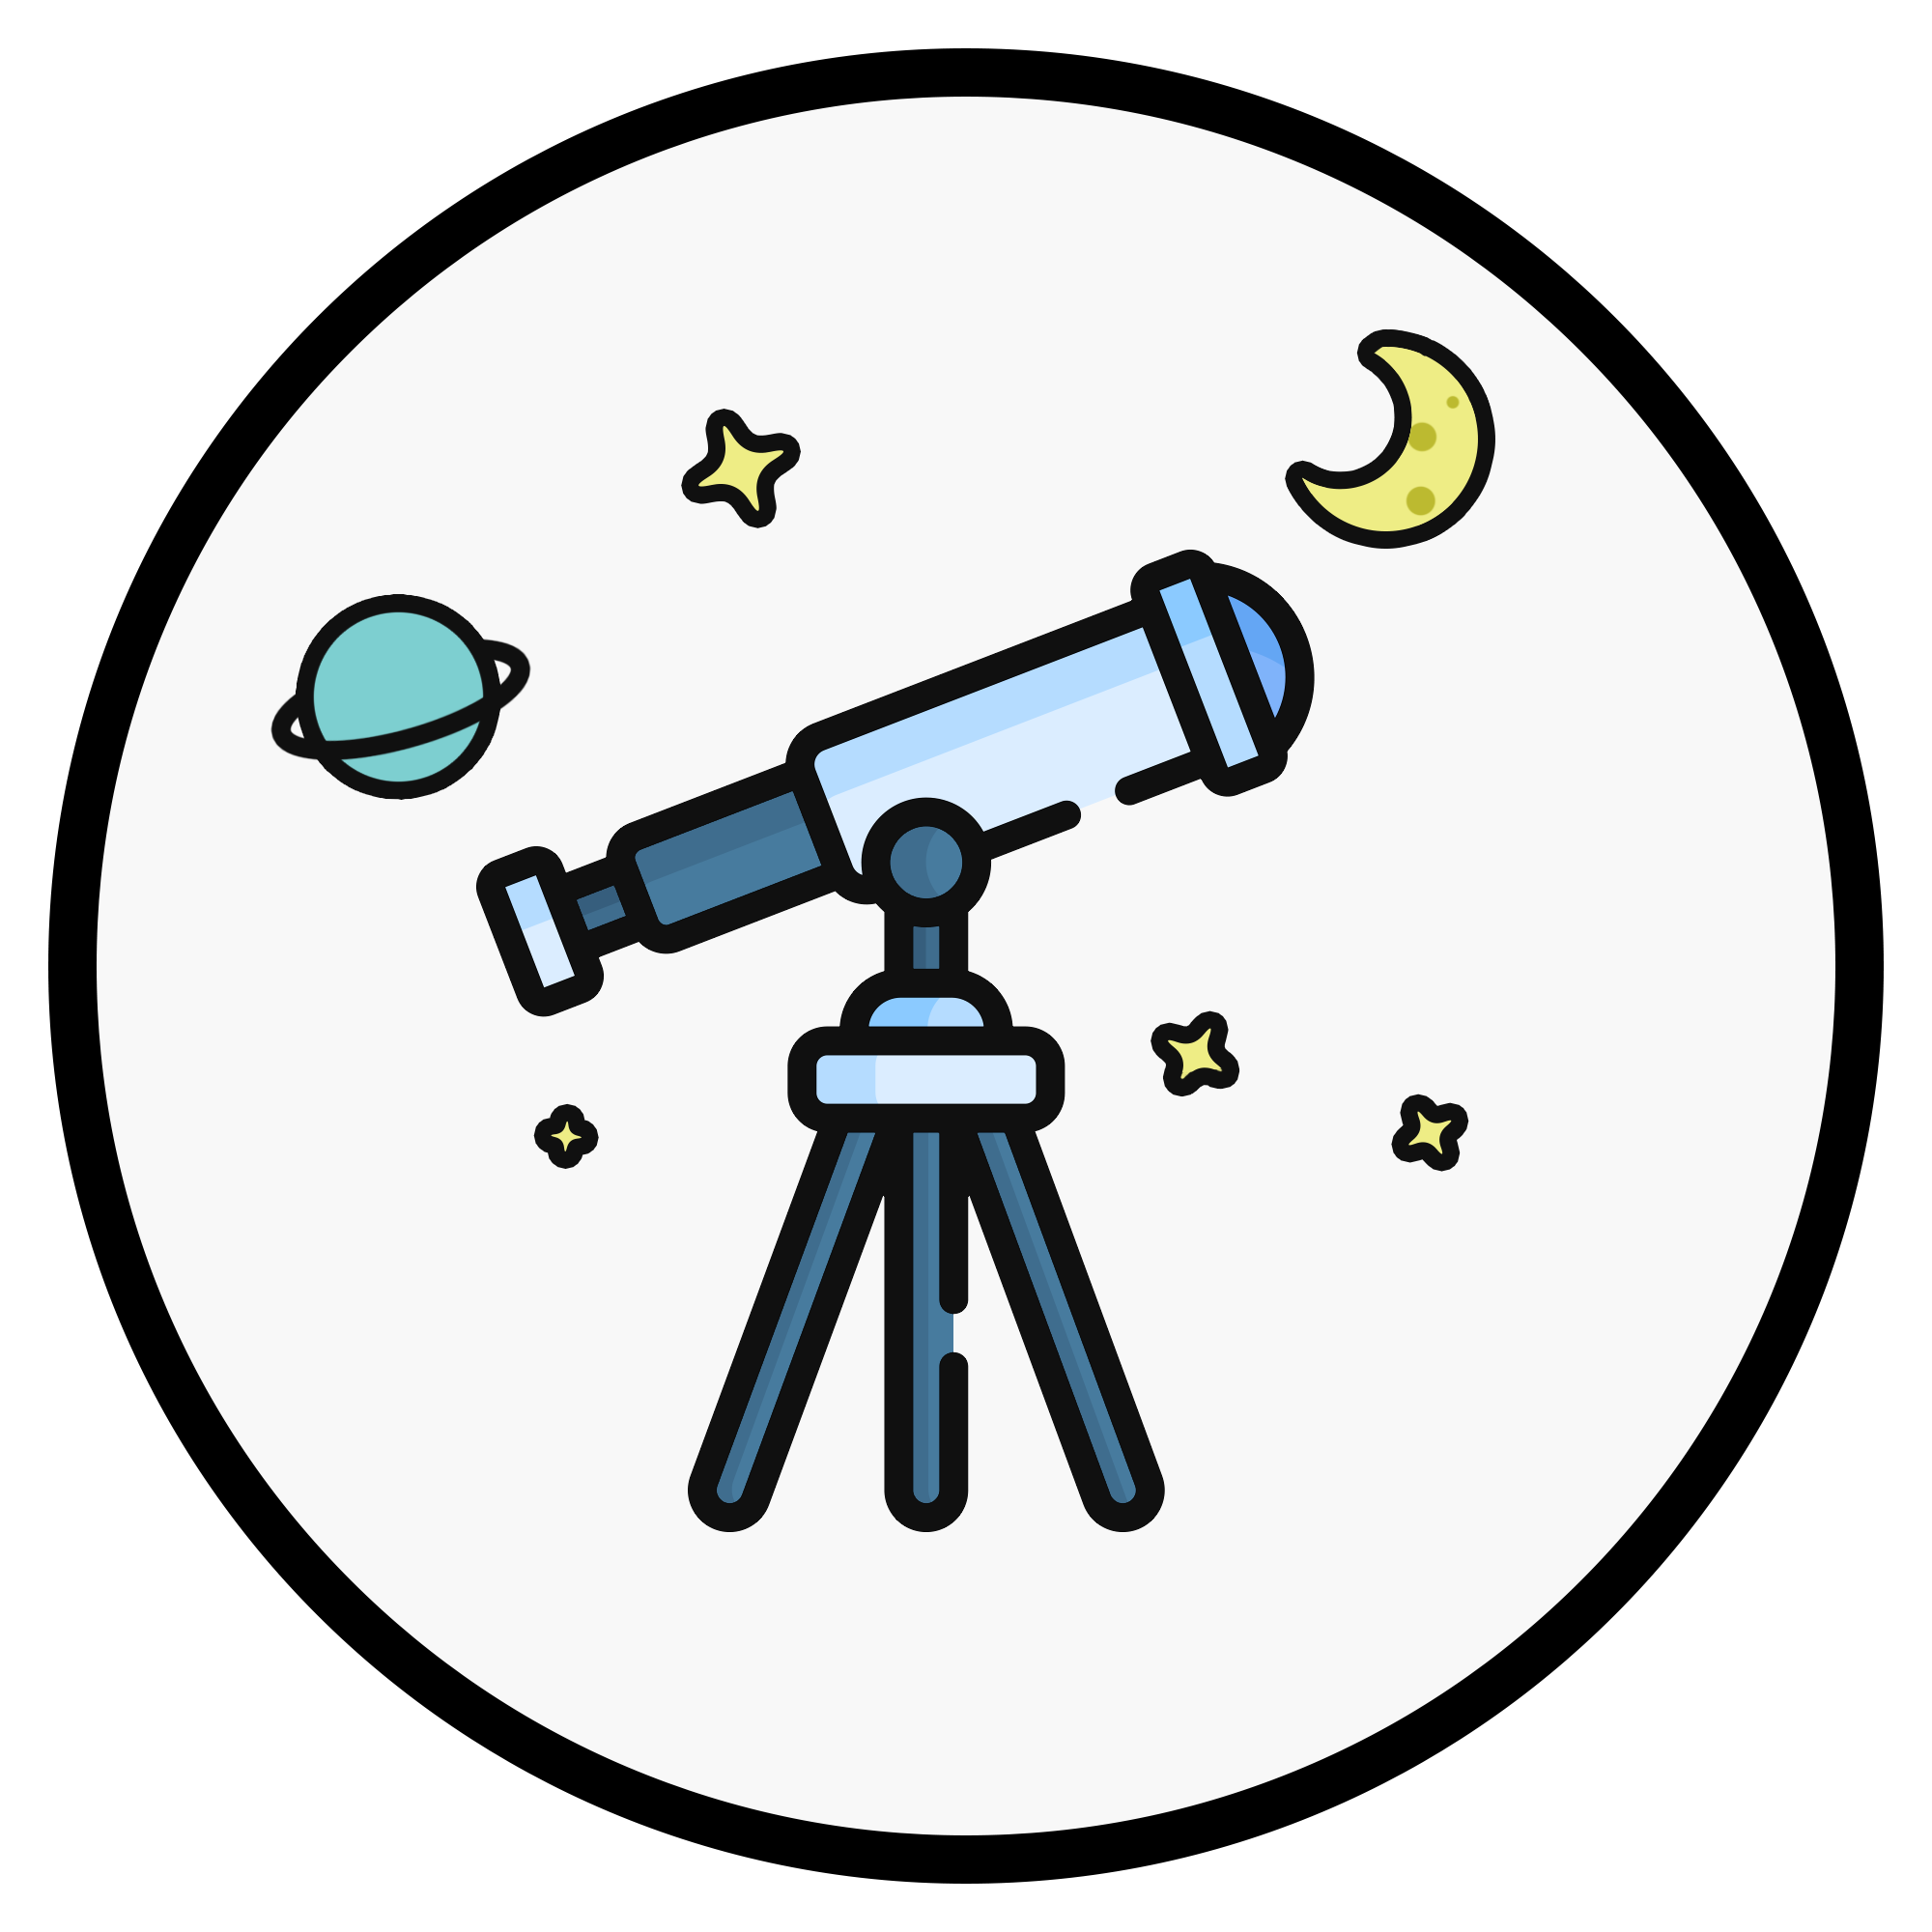 A cartoon logo of a telescope and moon with planets and stars